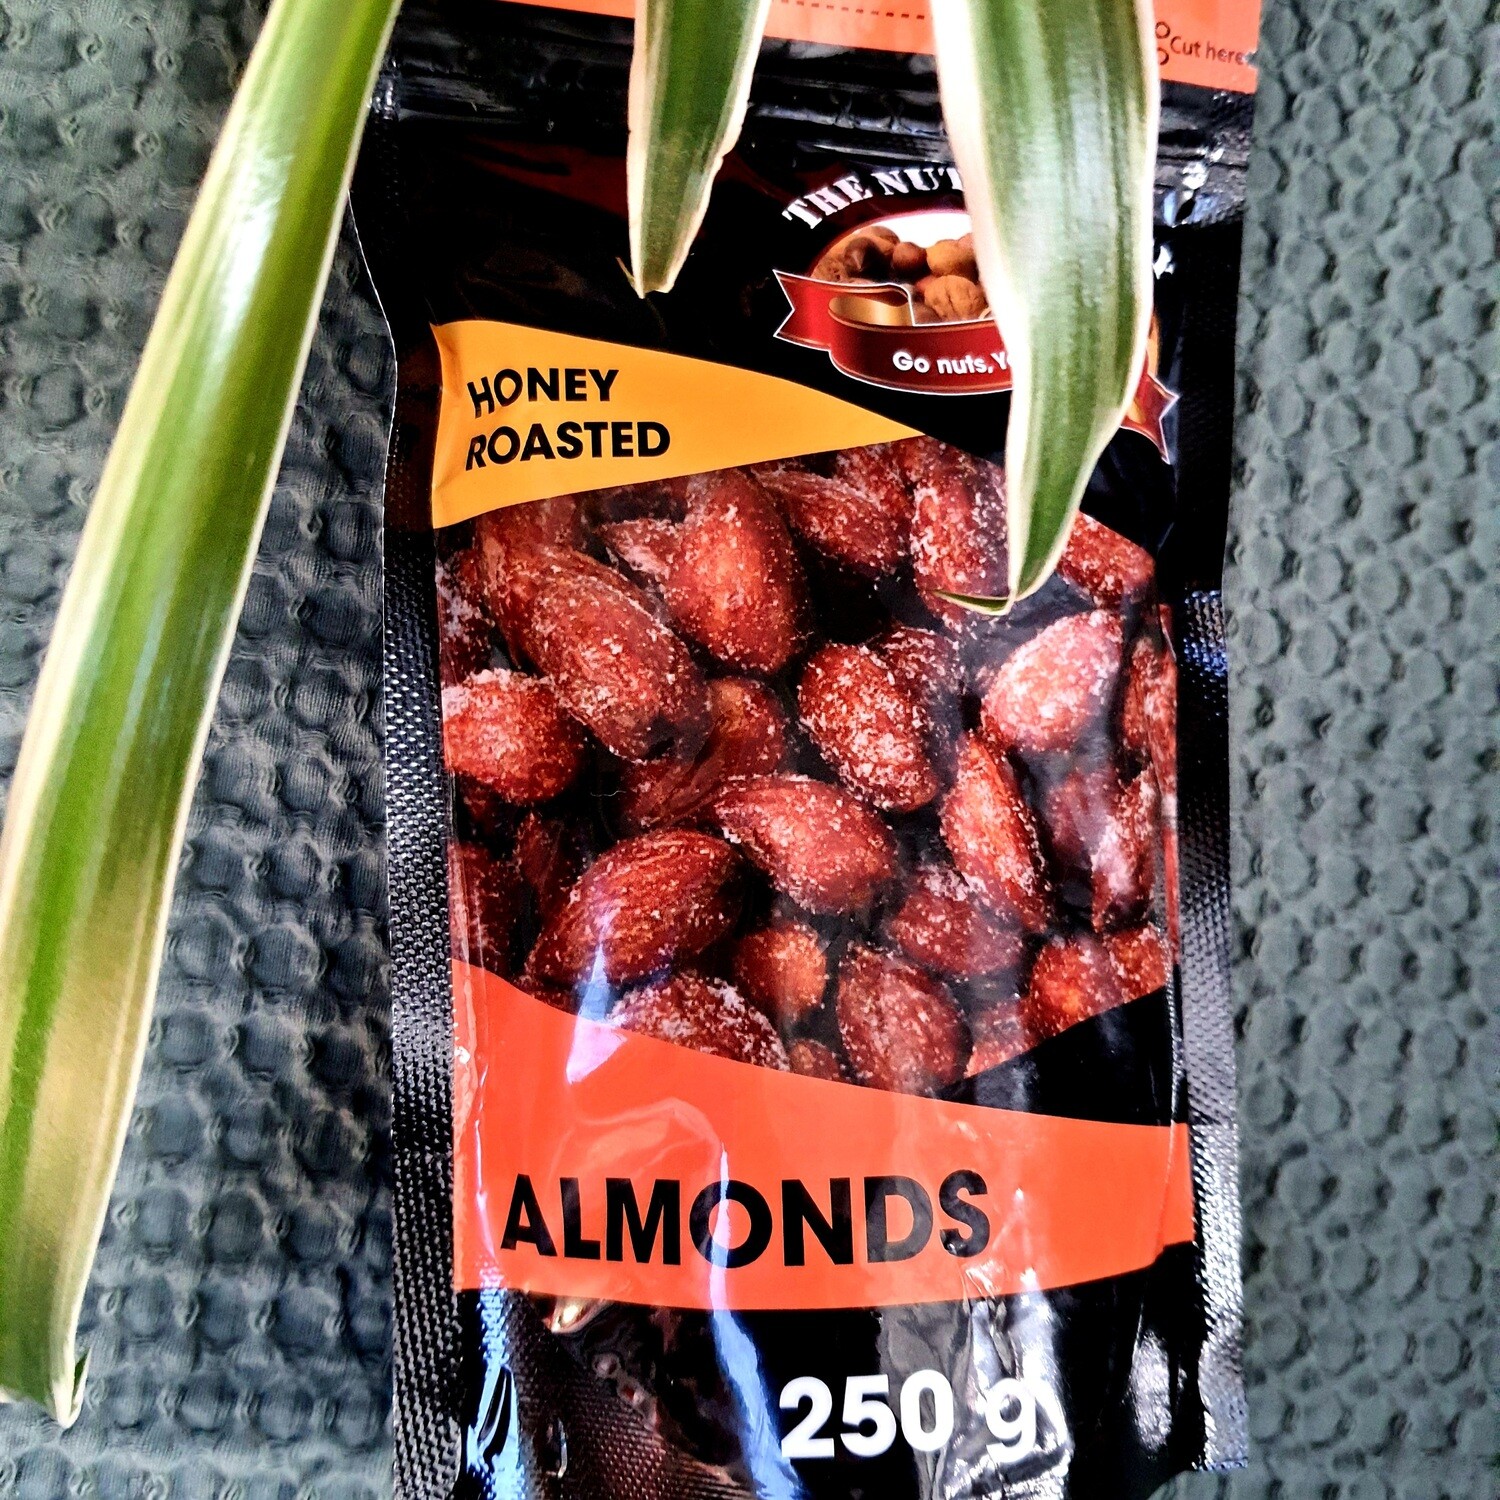 Nuts - Almonds Honey Roasted 250g